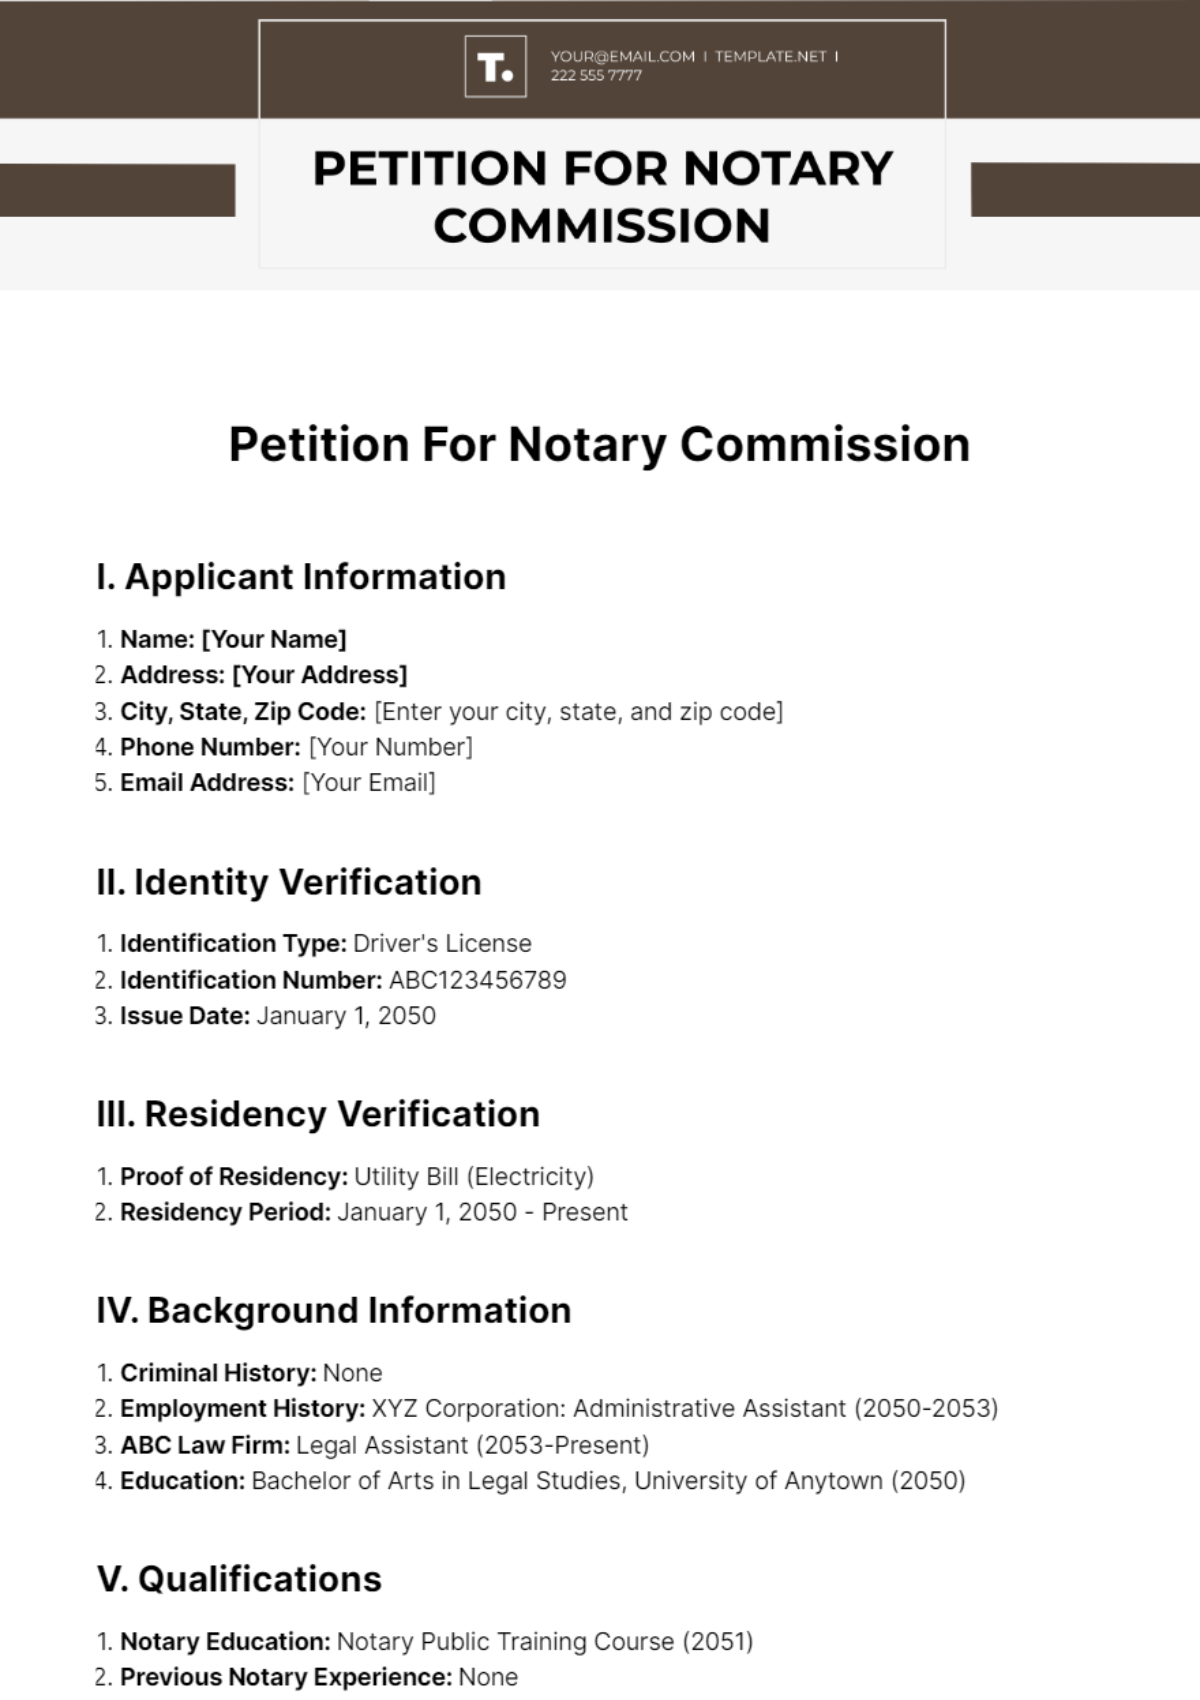 Free Petition For Notary Commission Template